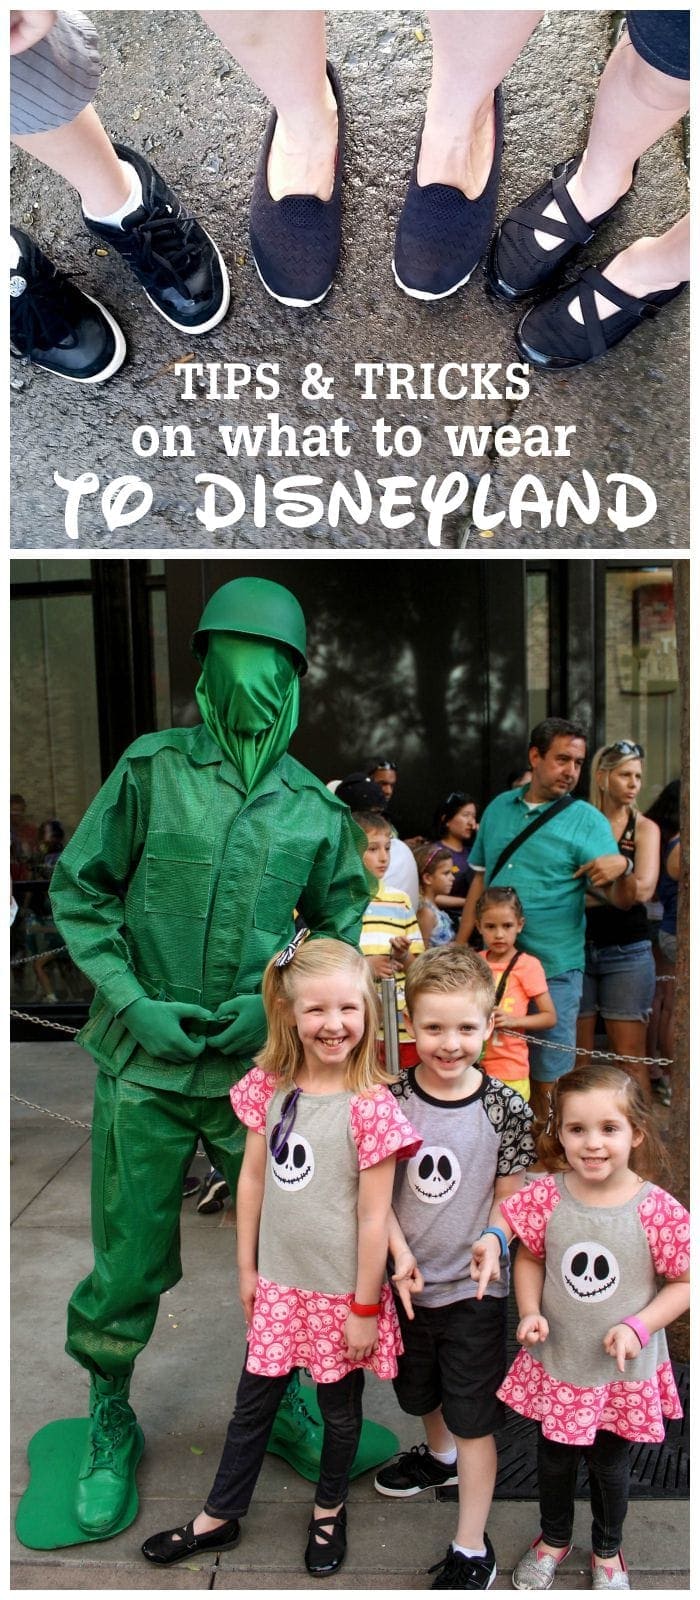 Tips & Tricks on What to Wear To Disneyland. Great ideas to help you as you prepare for your Disney adventure!